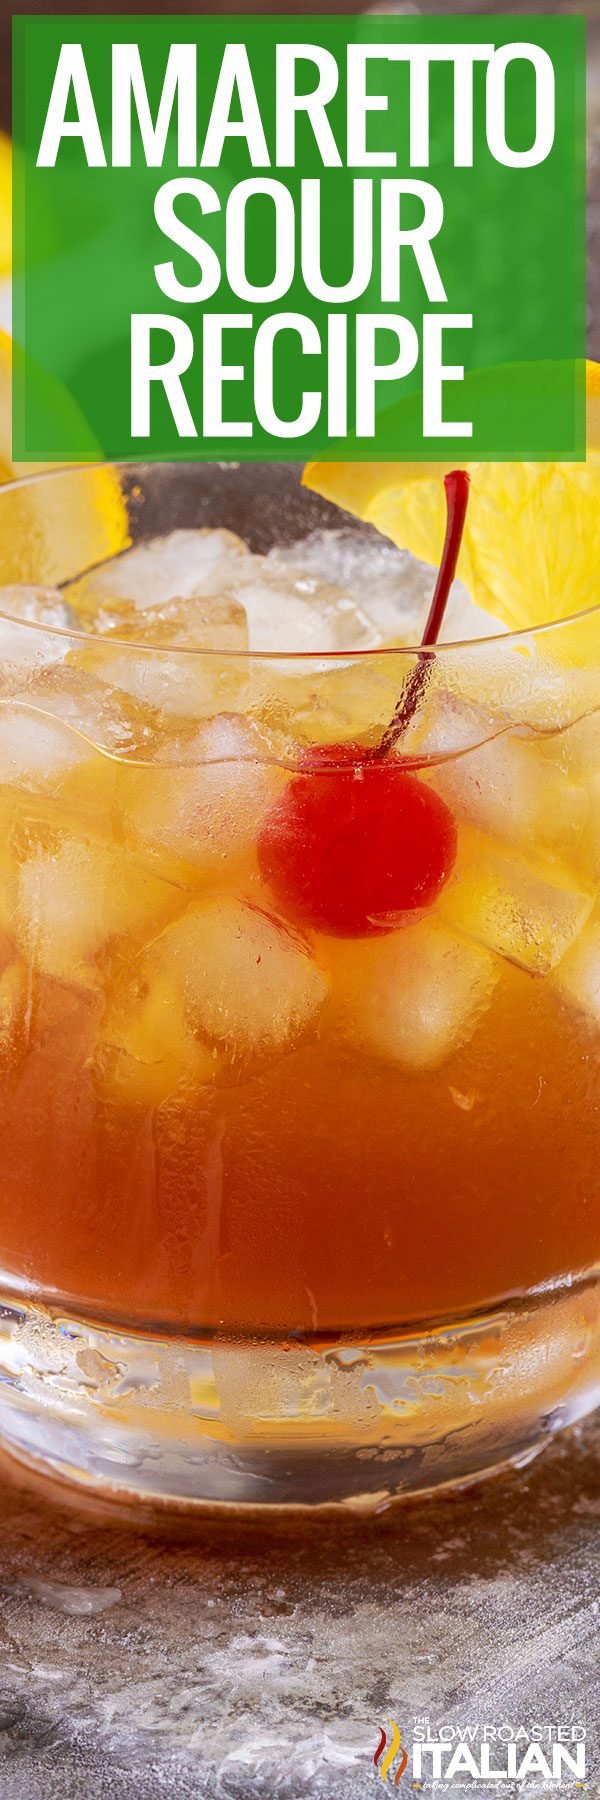 amaretto sour with cherry in glass close up